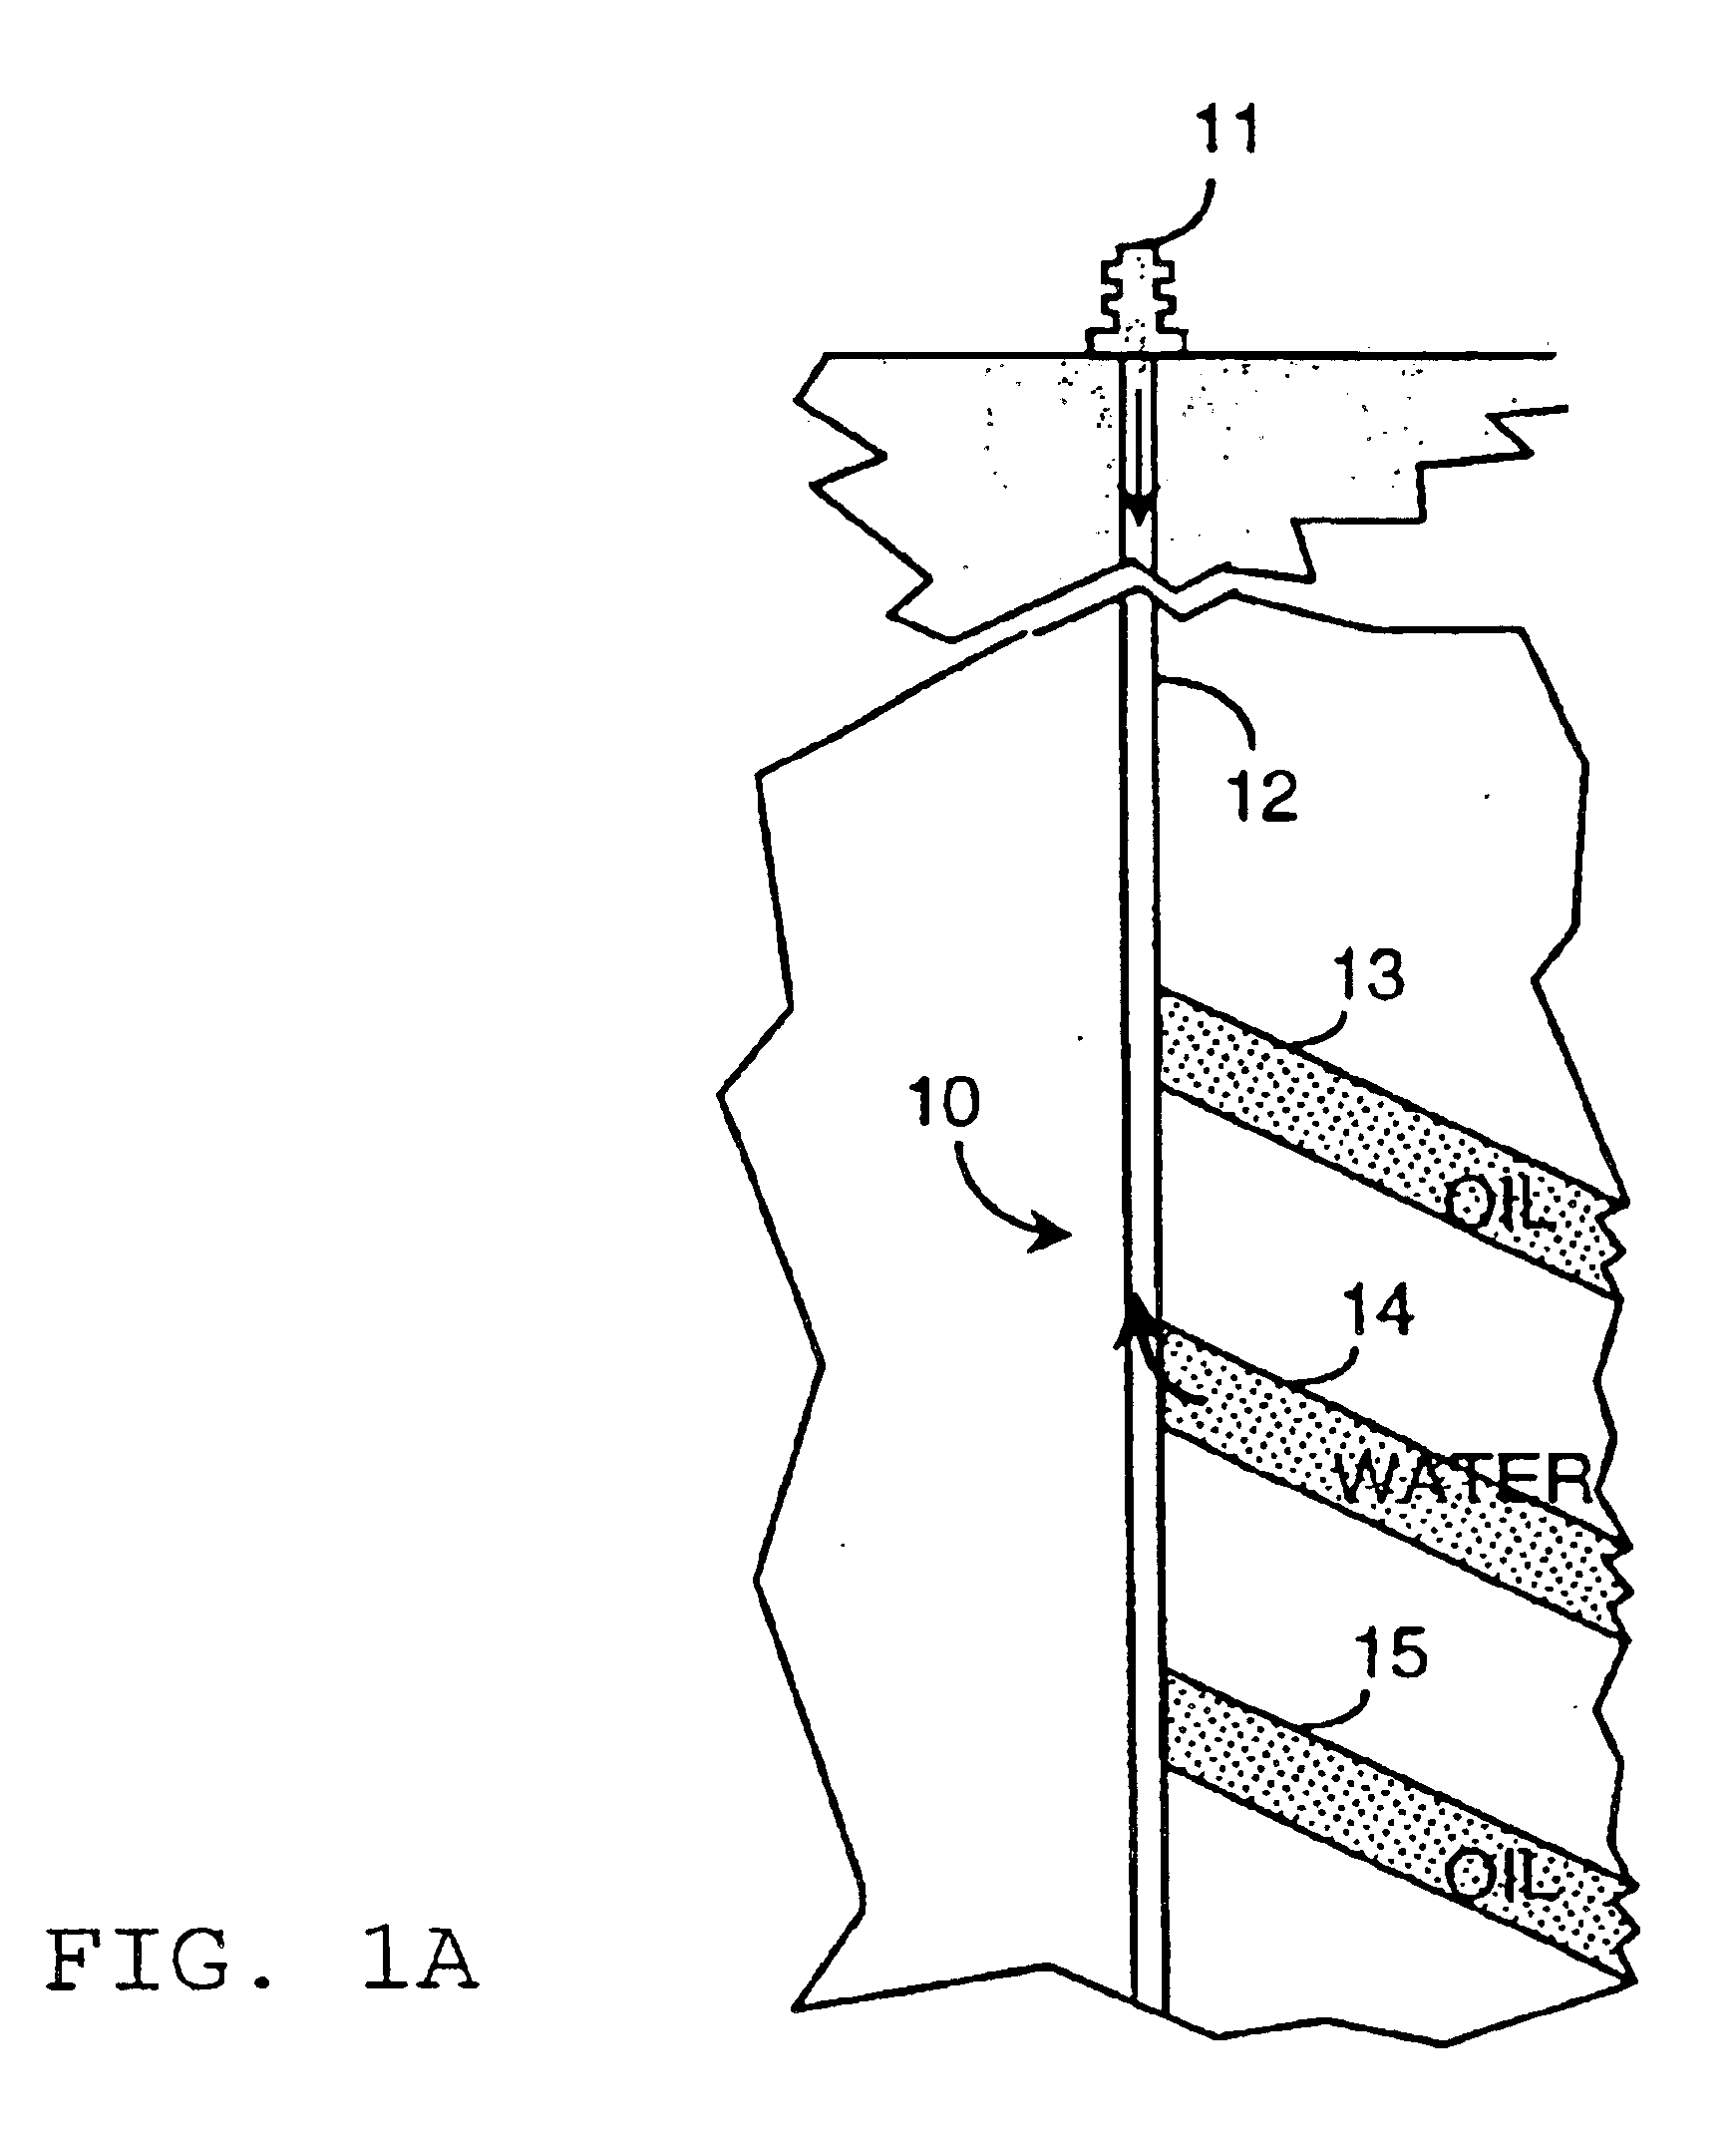 Method for water control